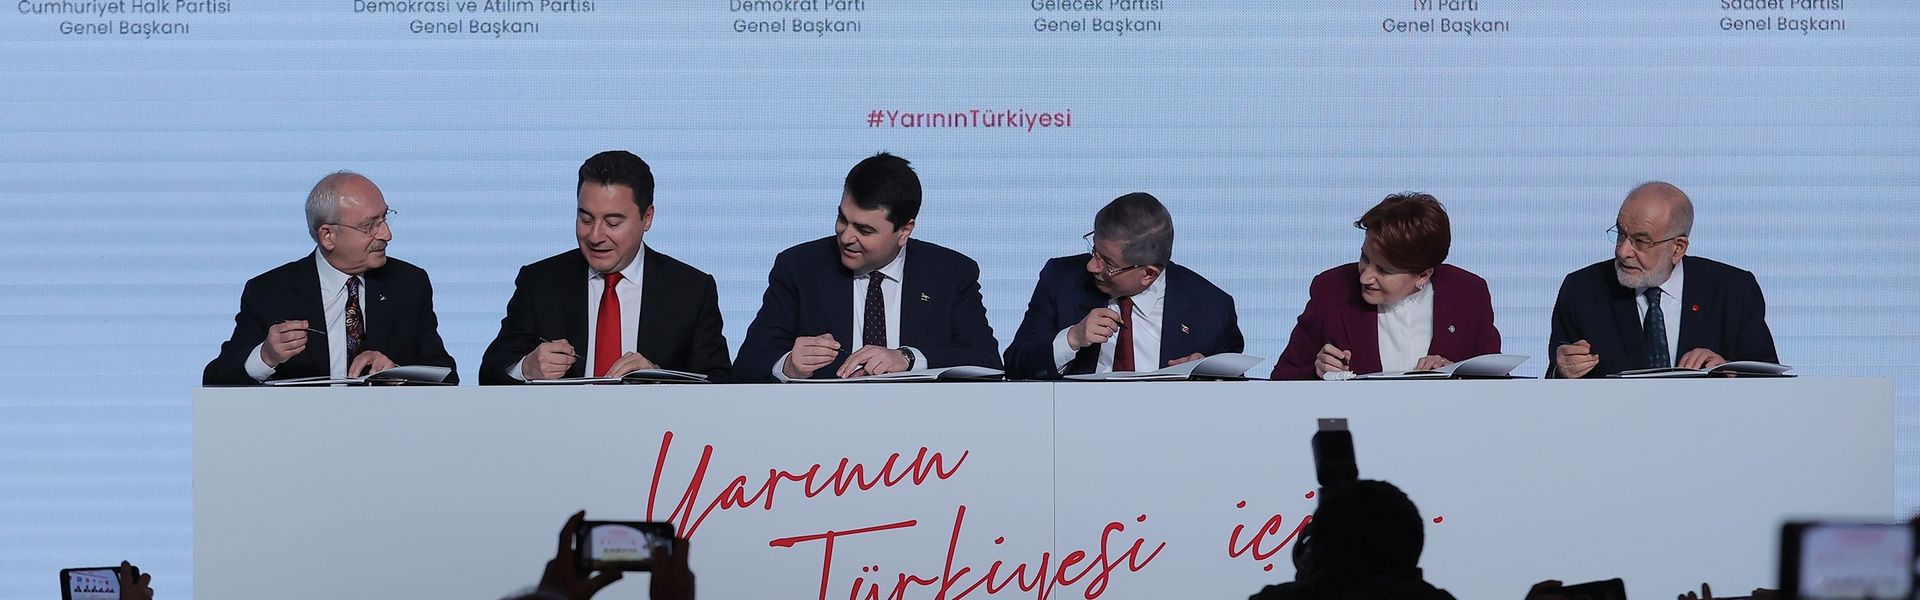 "Strengthened Parliamentary System": Six opposition party leaders sign a joint manifesto in Ankara, Turkey on 28 February 2022.